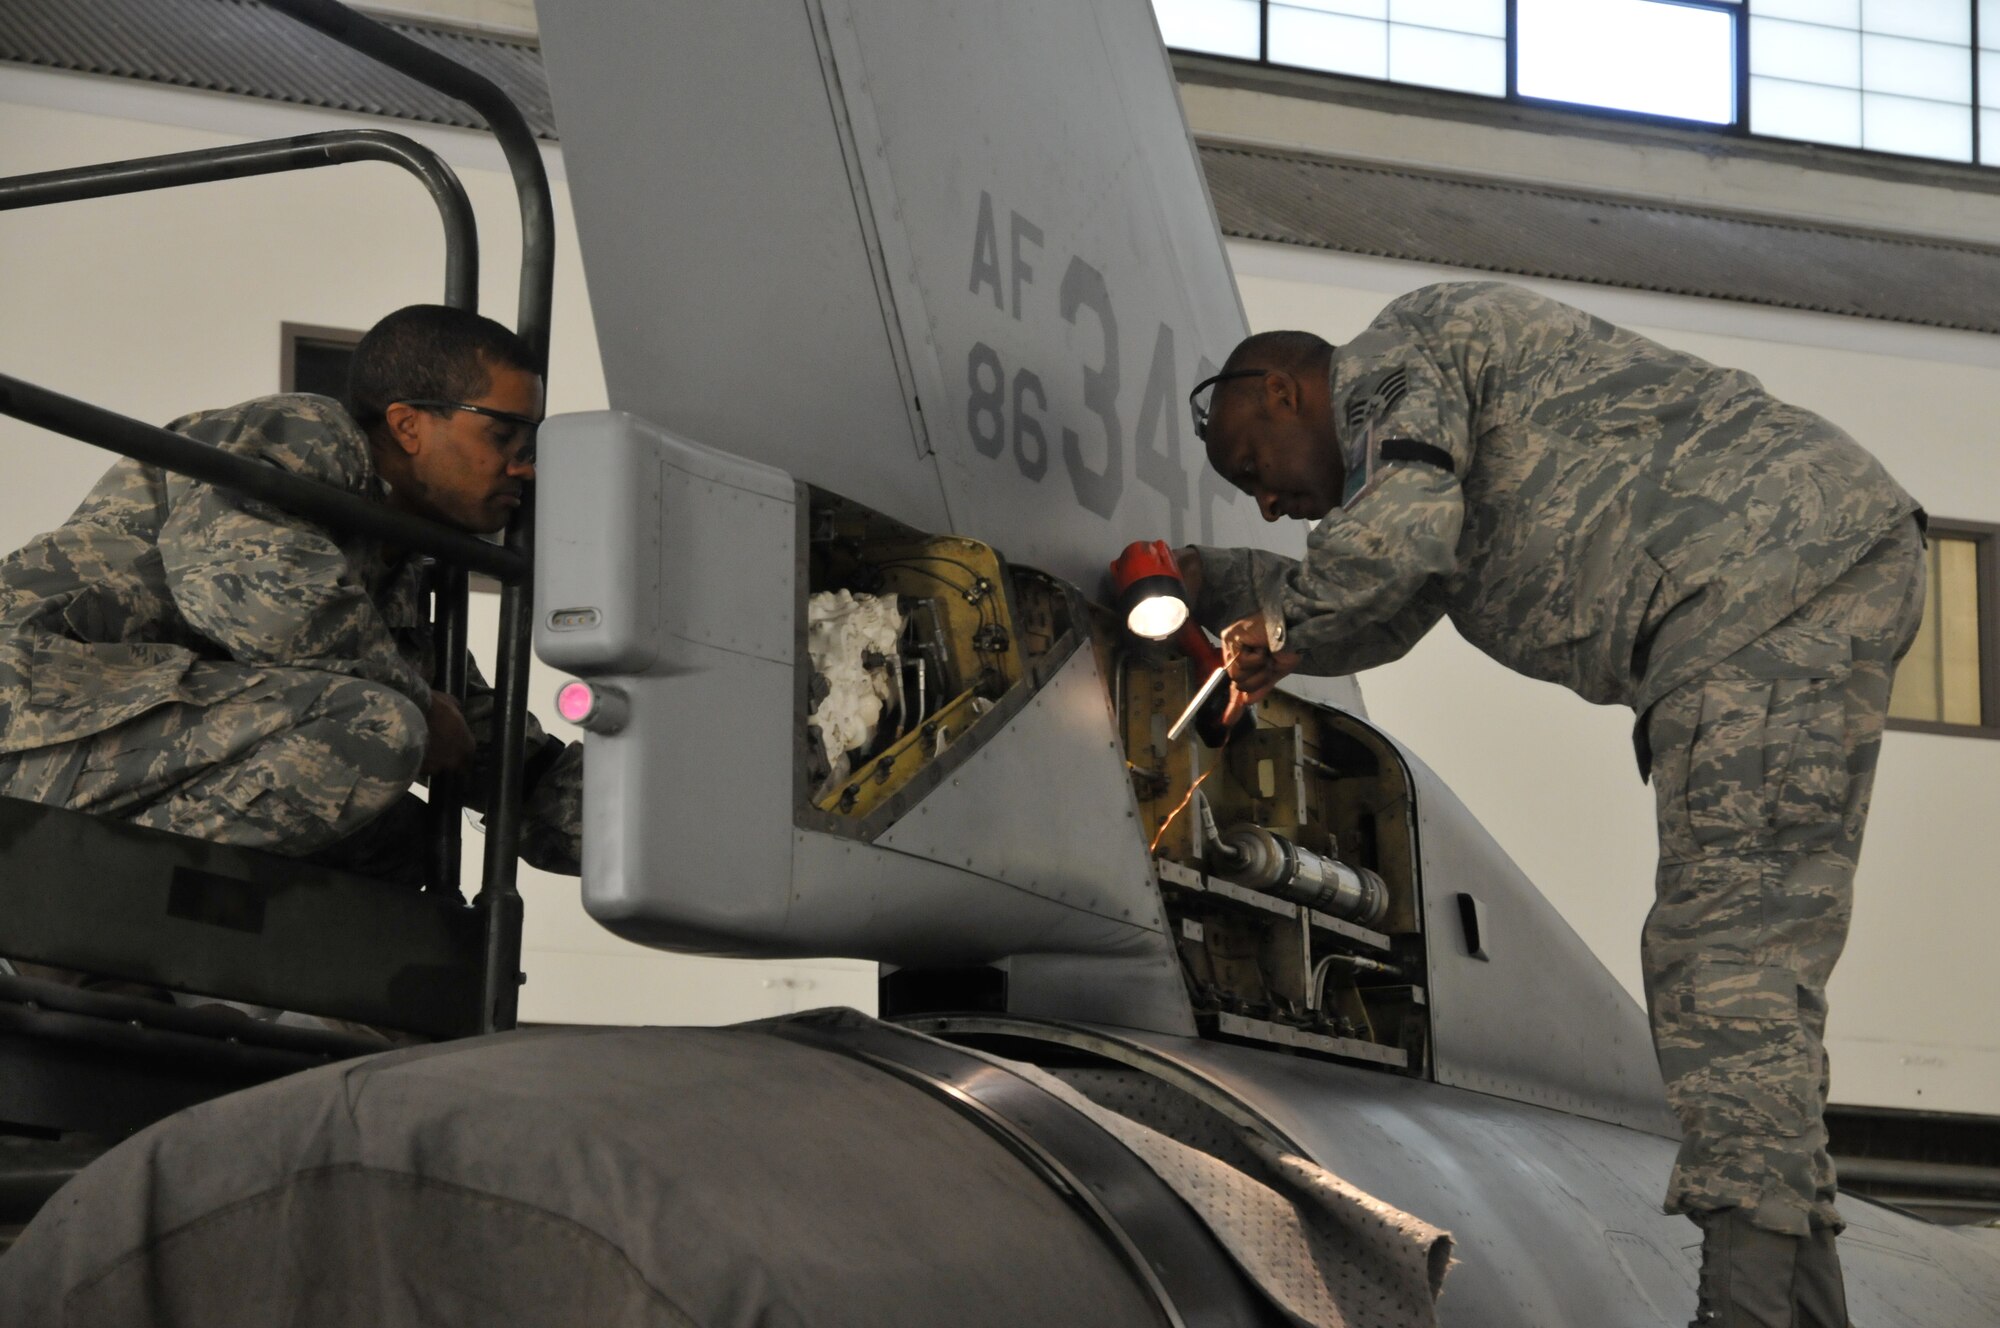 Staff. Sgt. Ebon Mitchell (left) and Staff Sgt. Michael Chapman (right) ,113th Wing Maintenance Group, District of Columbia Air National Guard, replace F-16 body panels after a 300-hour phase inspection Jan. 7, 2011 at Joint Base Andrews, Md. (U.S. Air Force photo by Tech. Sgt William R. Parks)